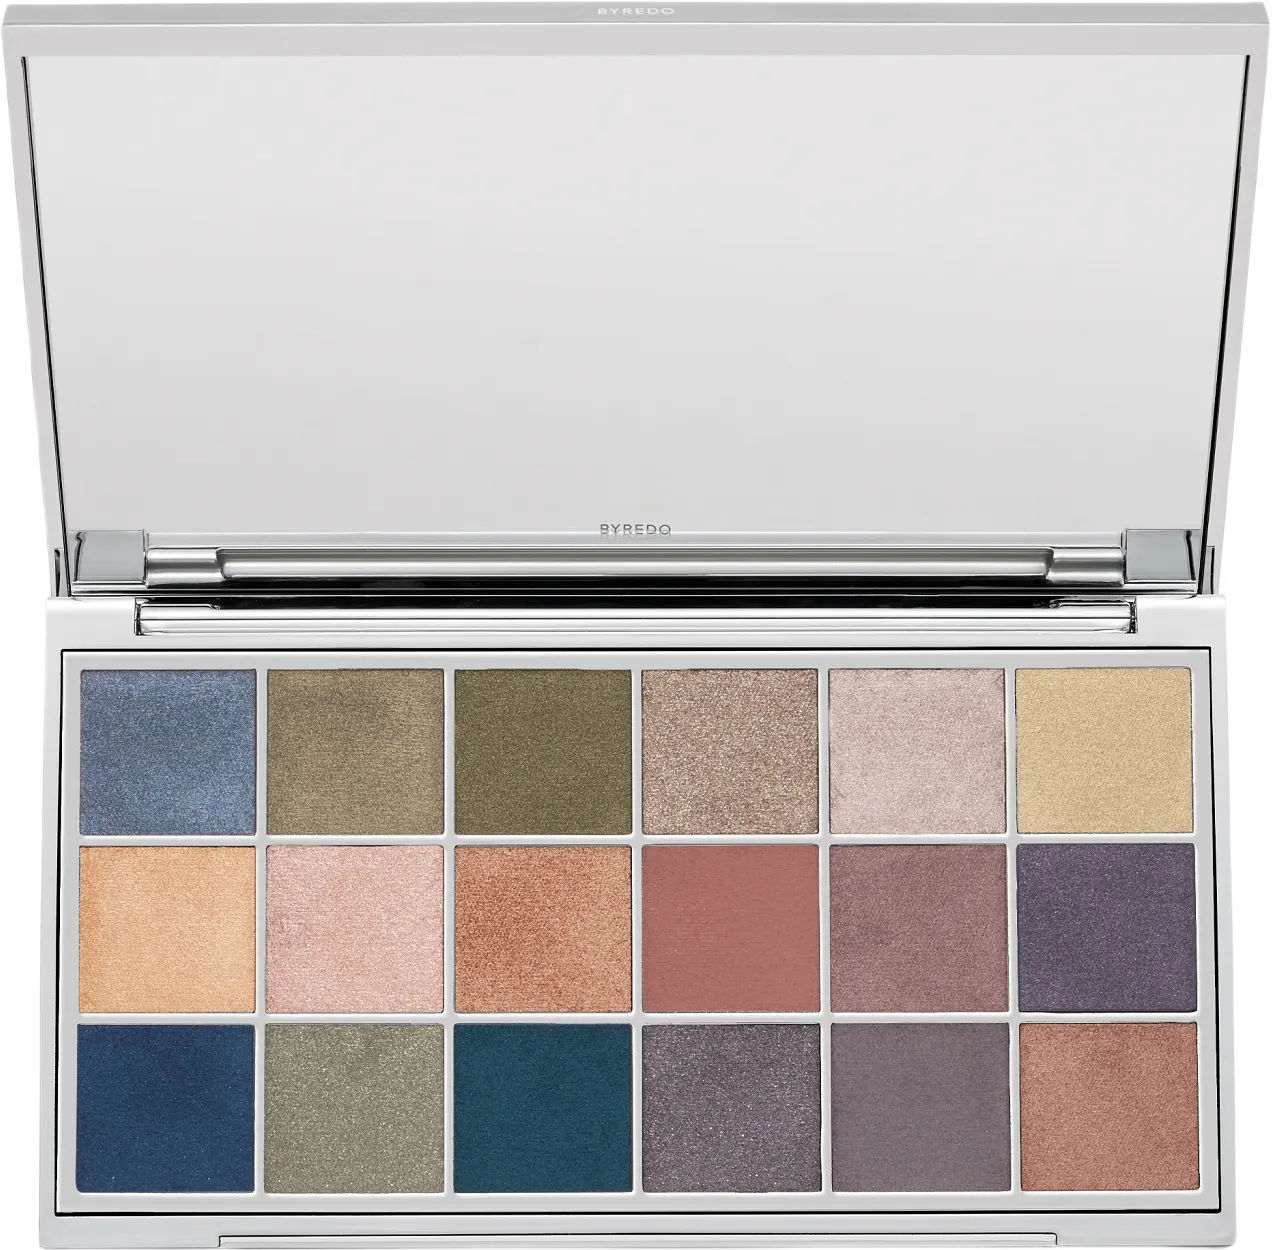 Mineralscapes​ Eyeshadow Palette
Limited edition